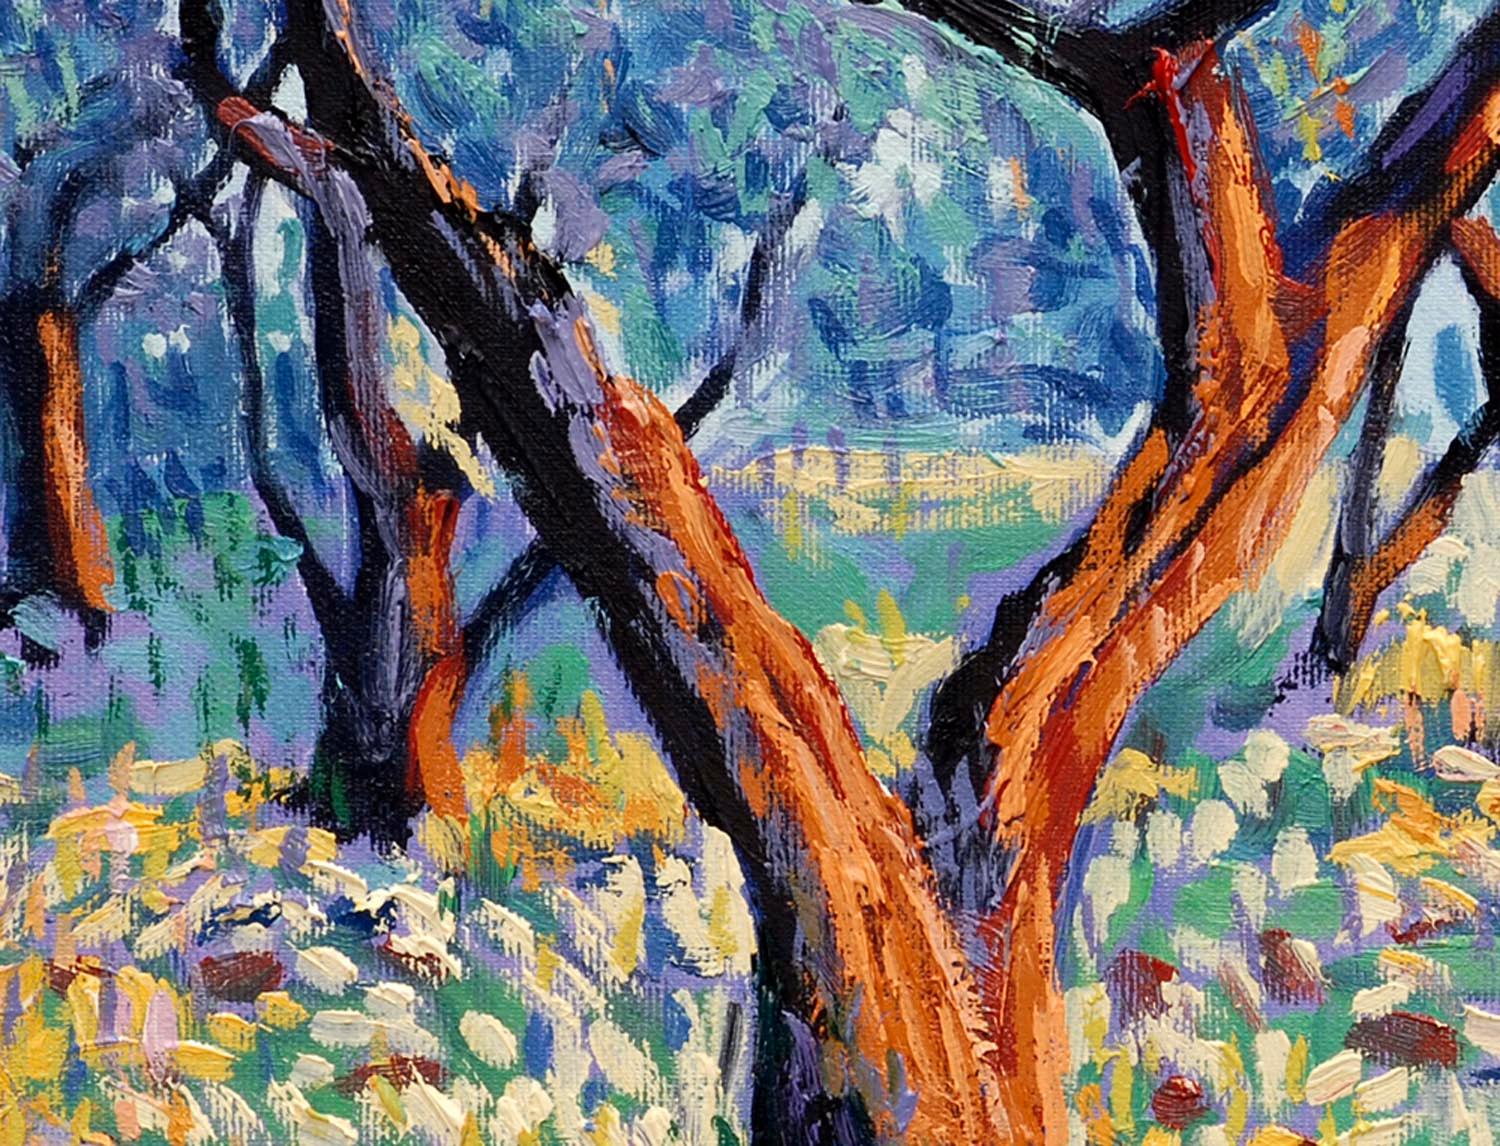 Tree Poem 10 (The Olive Grove) impressionist oil painting - Painting by Lee Tiller